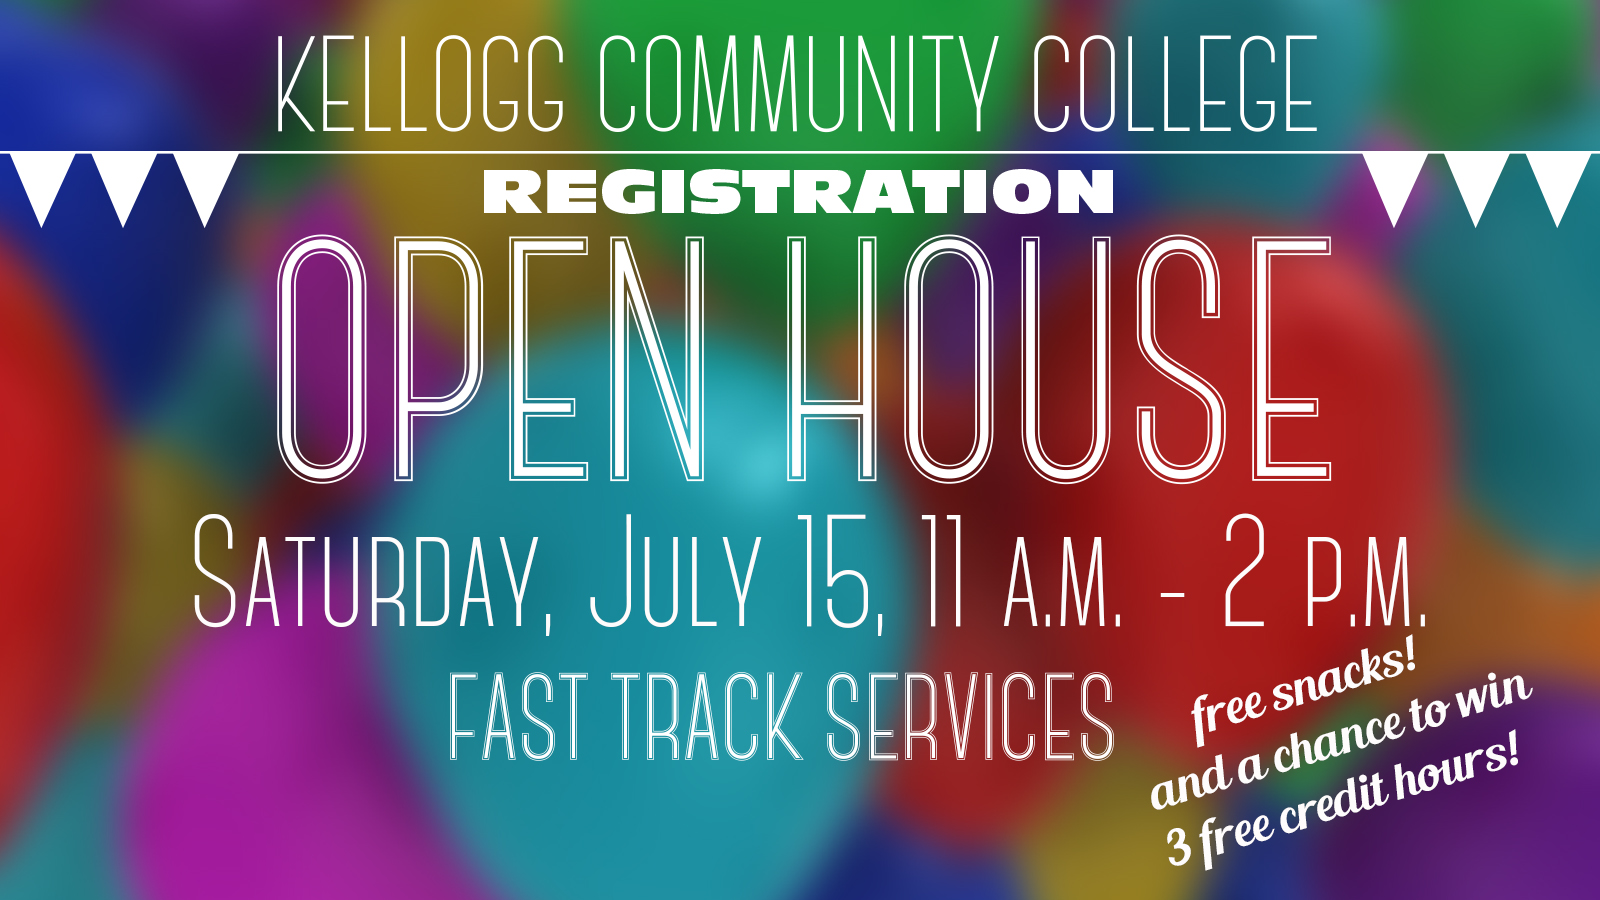 A text slide promoting KCC's upcoming Registration Open House, scheduled for 11 a.m. to 2 p.m. July 15, 2017, on campus in Battle Creek.